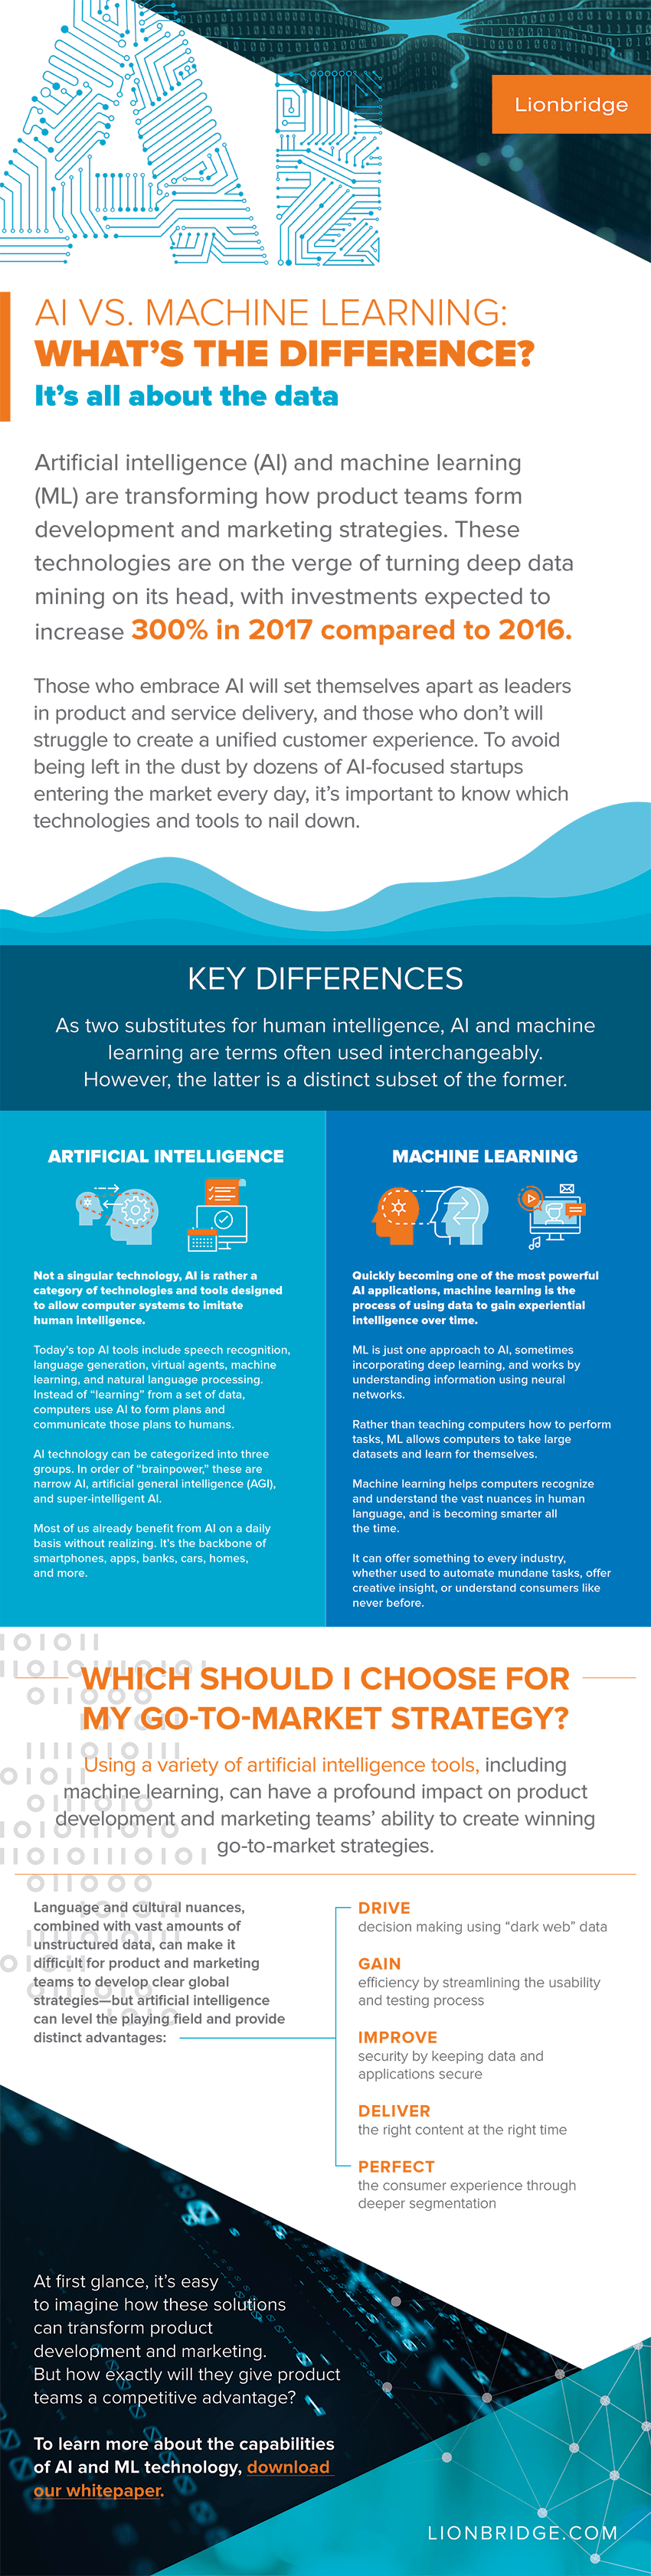 AI vs Machine Learning: What’s the Difference? Infographic